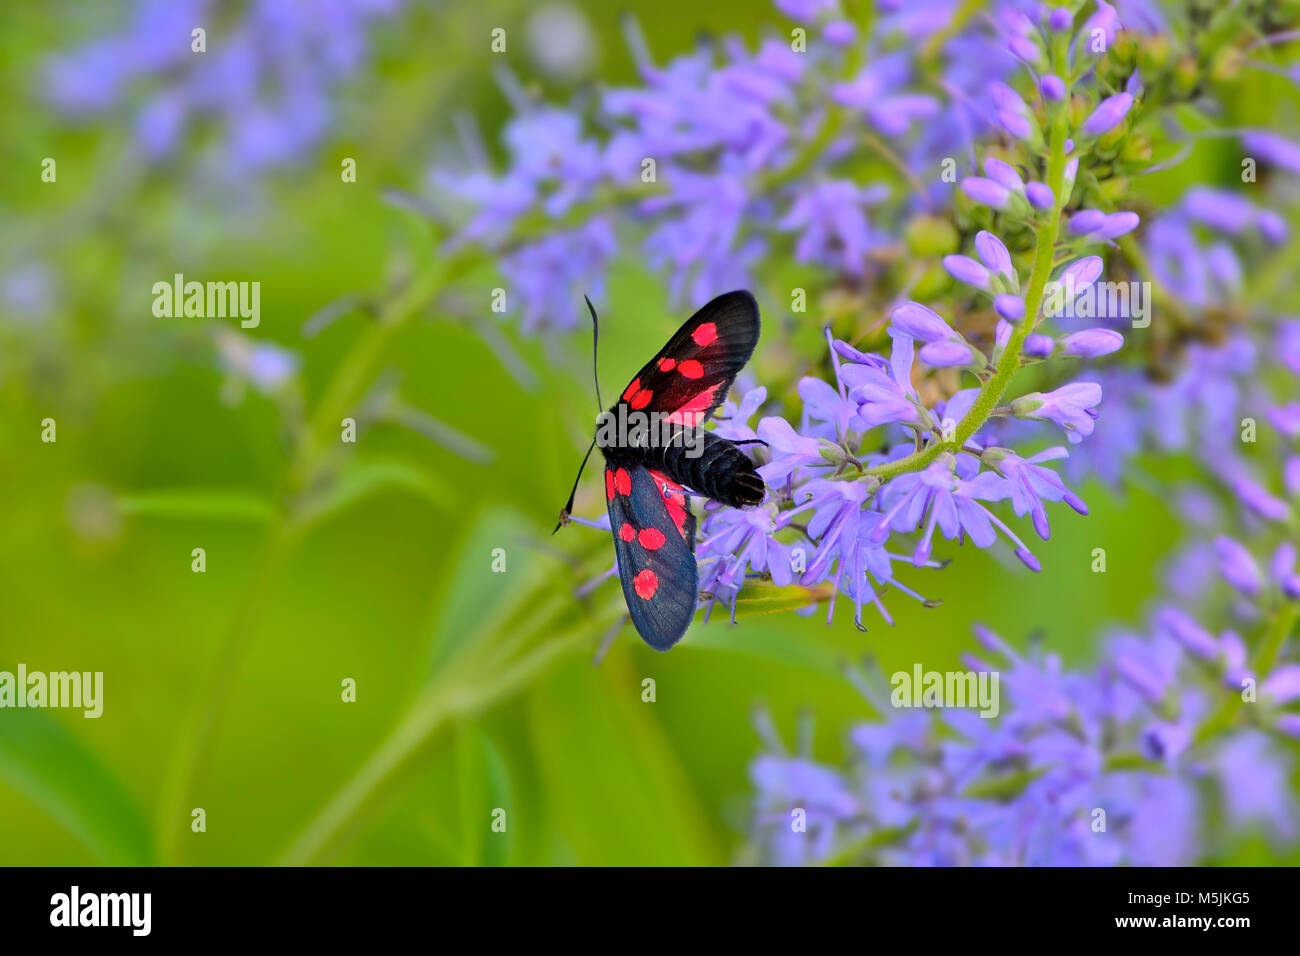 Butterfly Zygaena filipendulae with bright red spots on wings close up on blue veronica fower sitting. Beautiful summer green blurred background with  Stock Photo